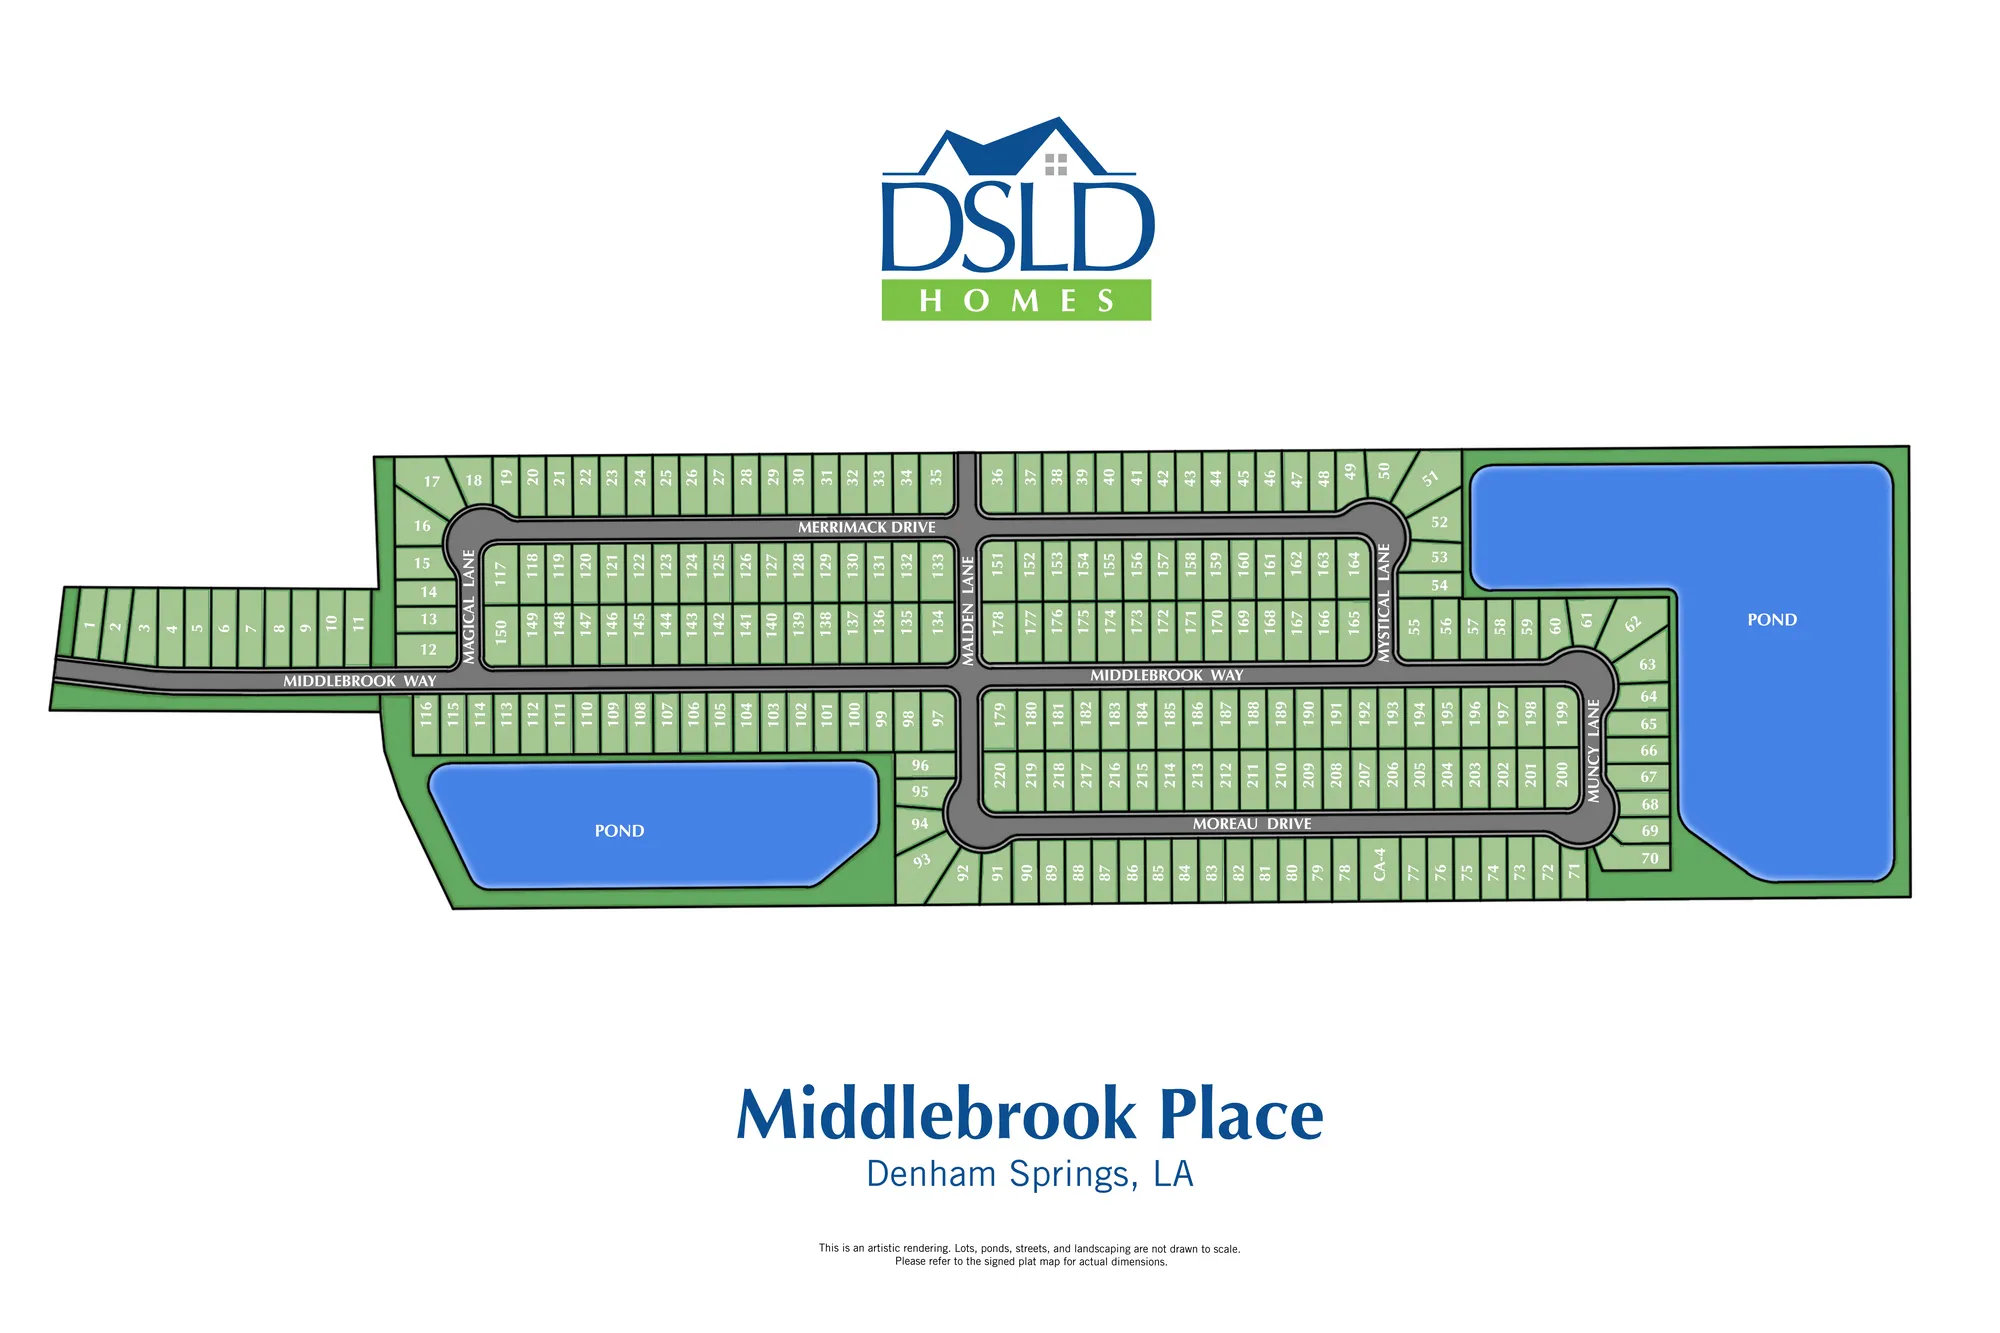 Middlebrook Place